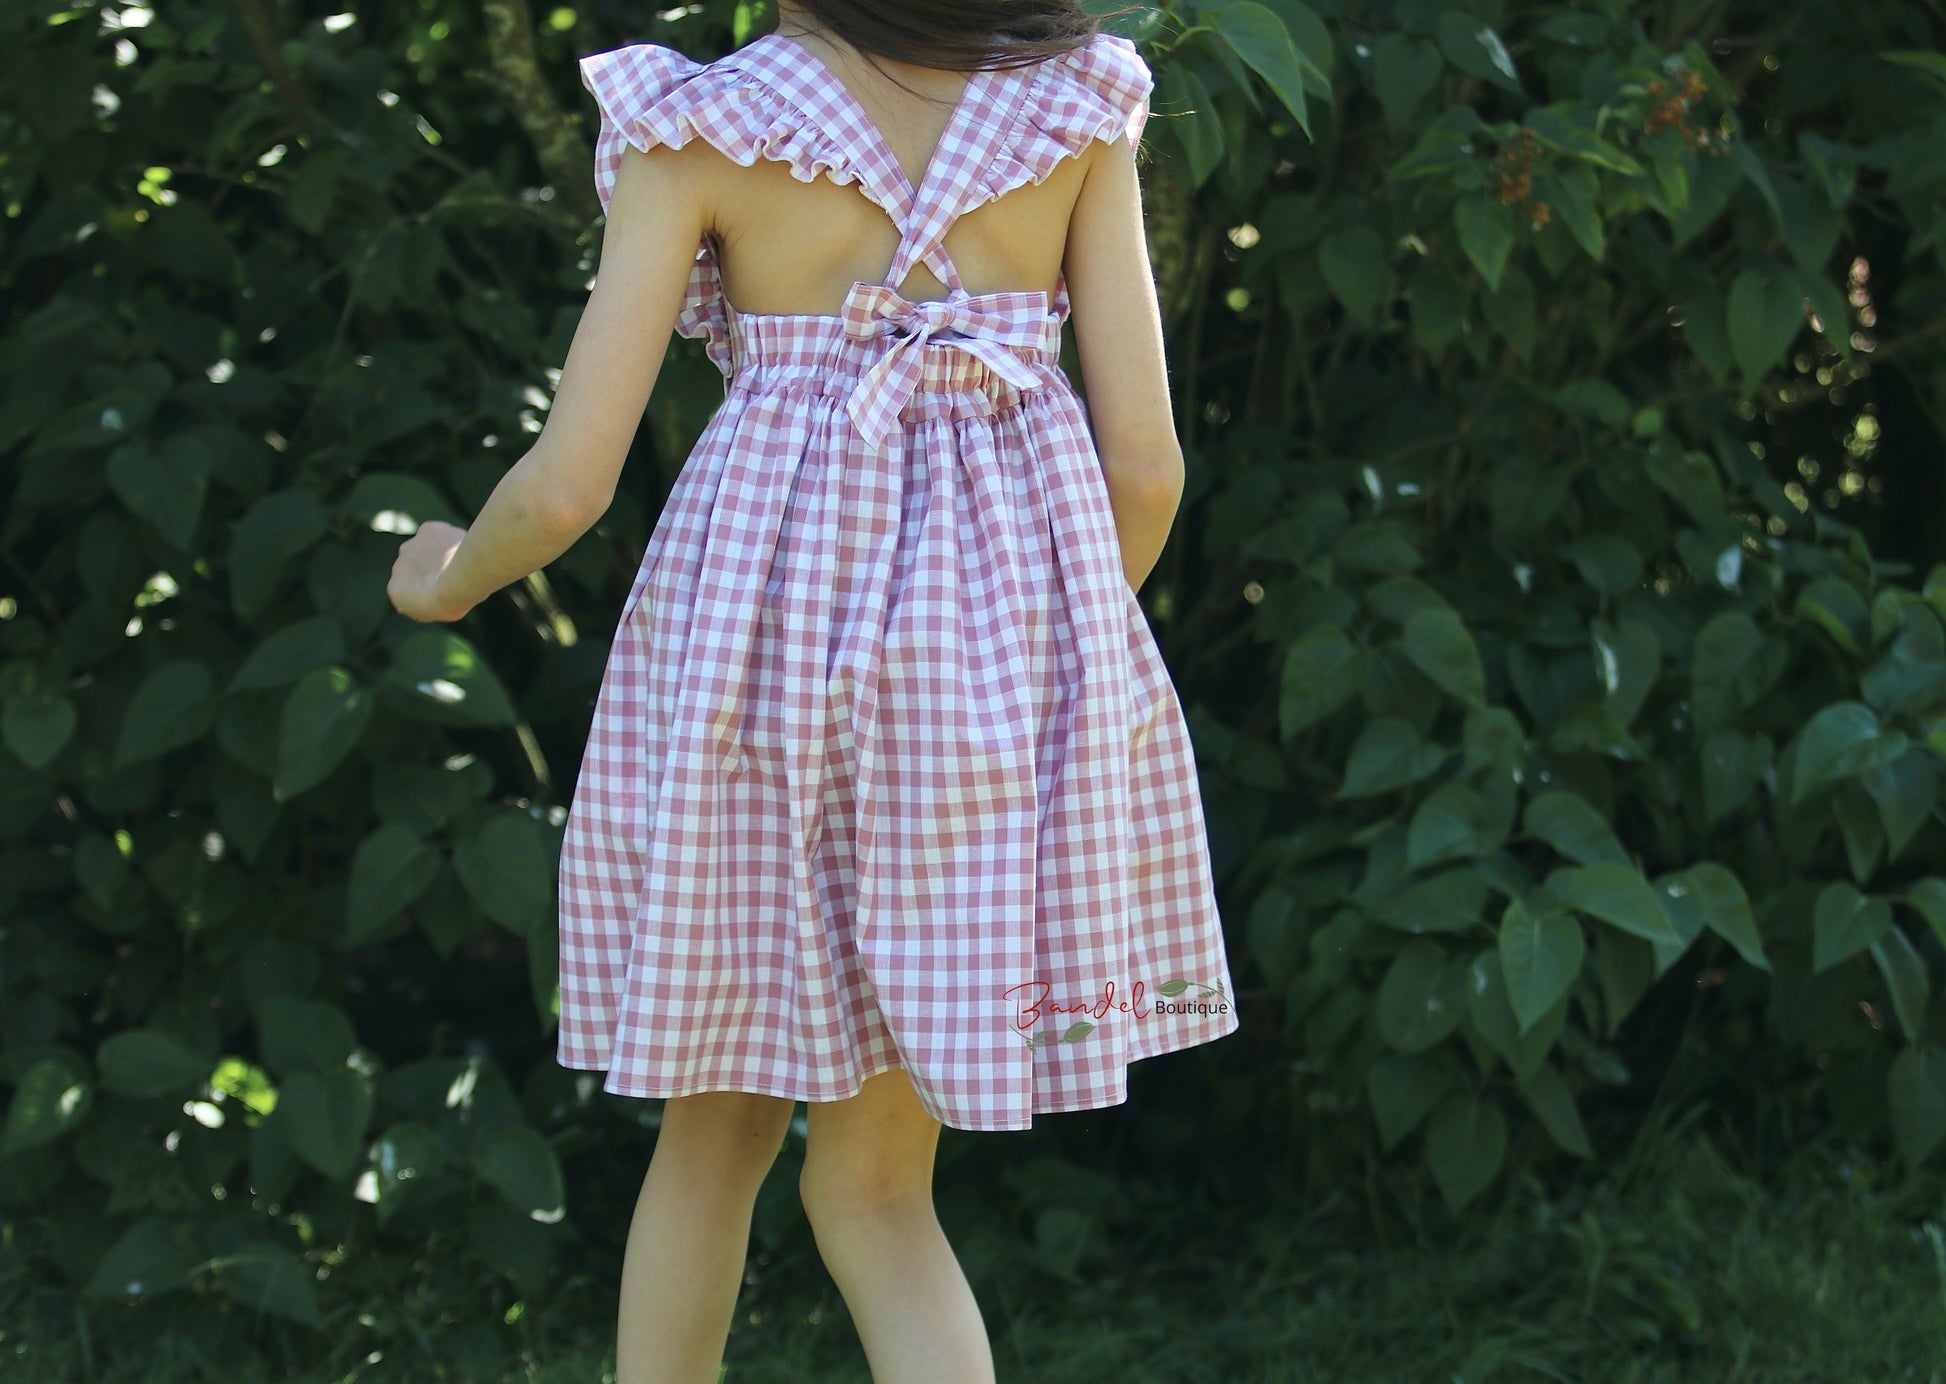 Vintage- inspired pinafore check  girl dress in old- rose color, features delightful sleeve ruffles, adjustable straps and gathered skirt. 